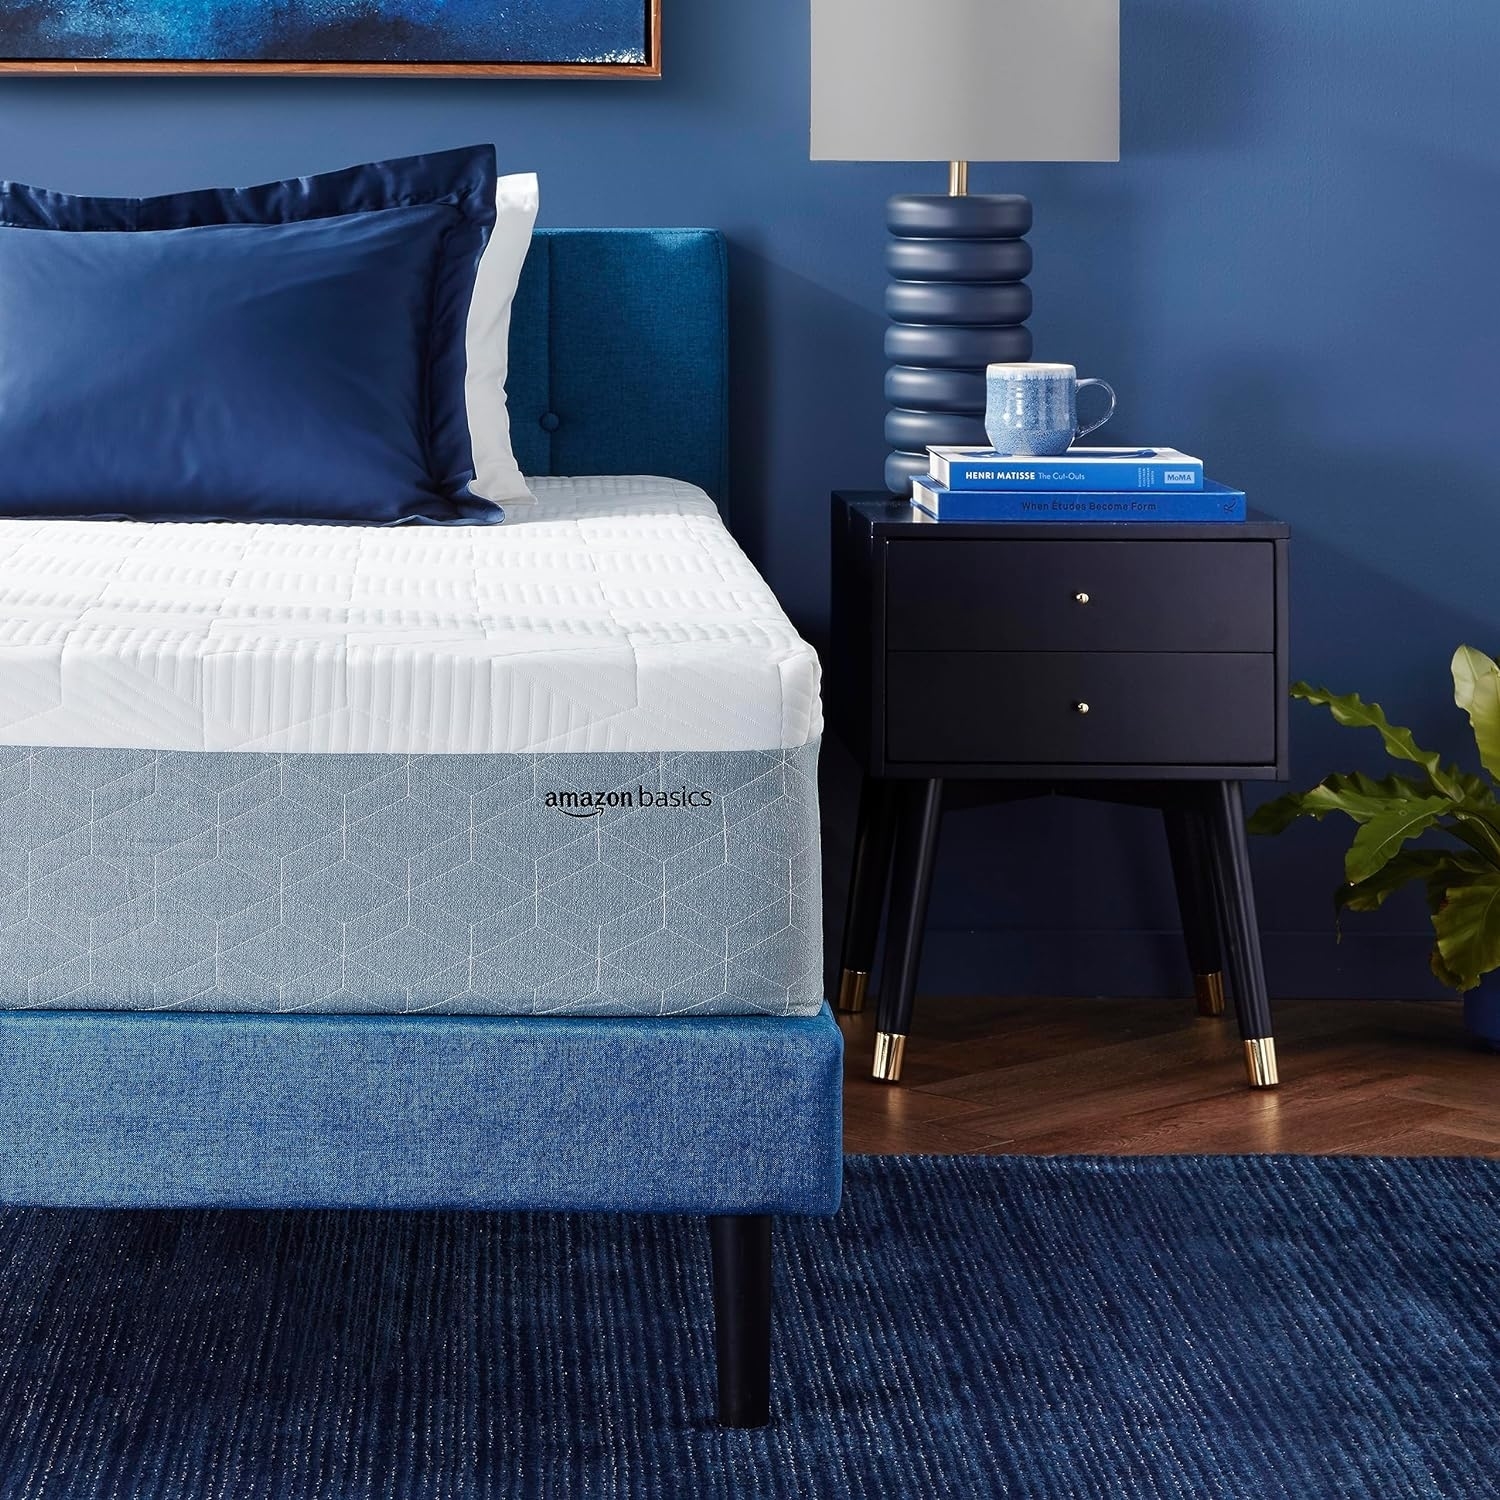 The thick mattress on top of a blue bed frame